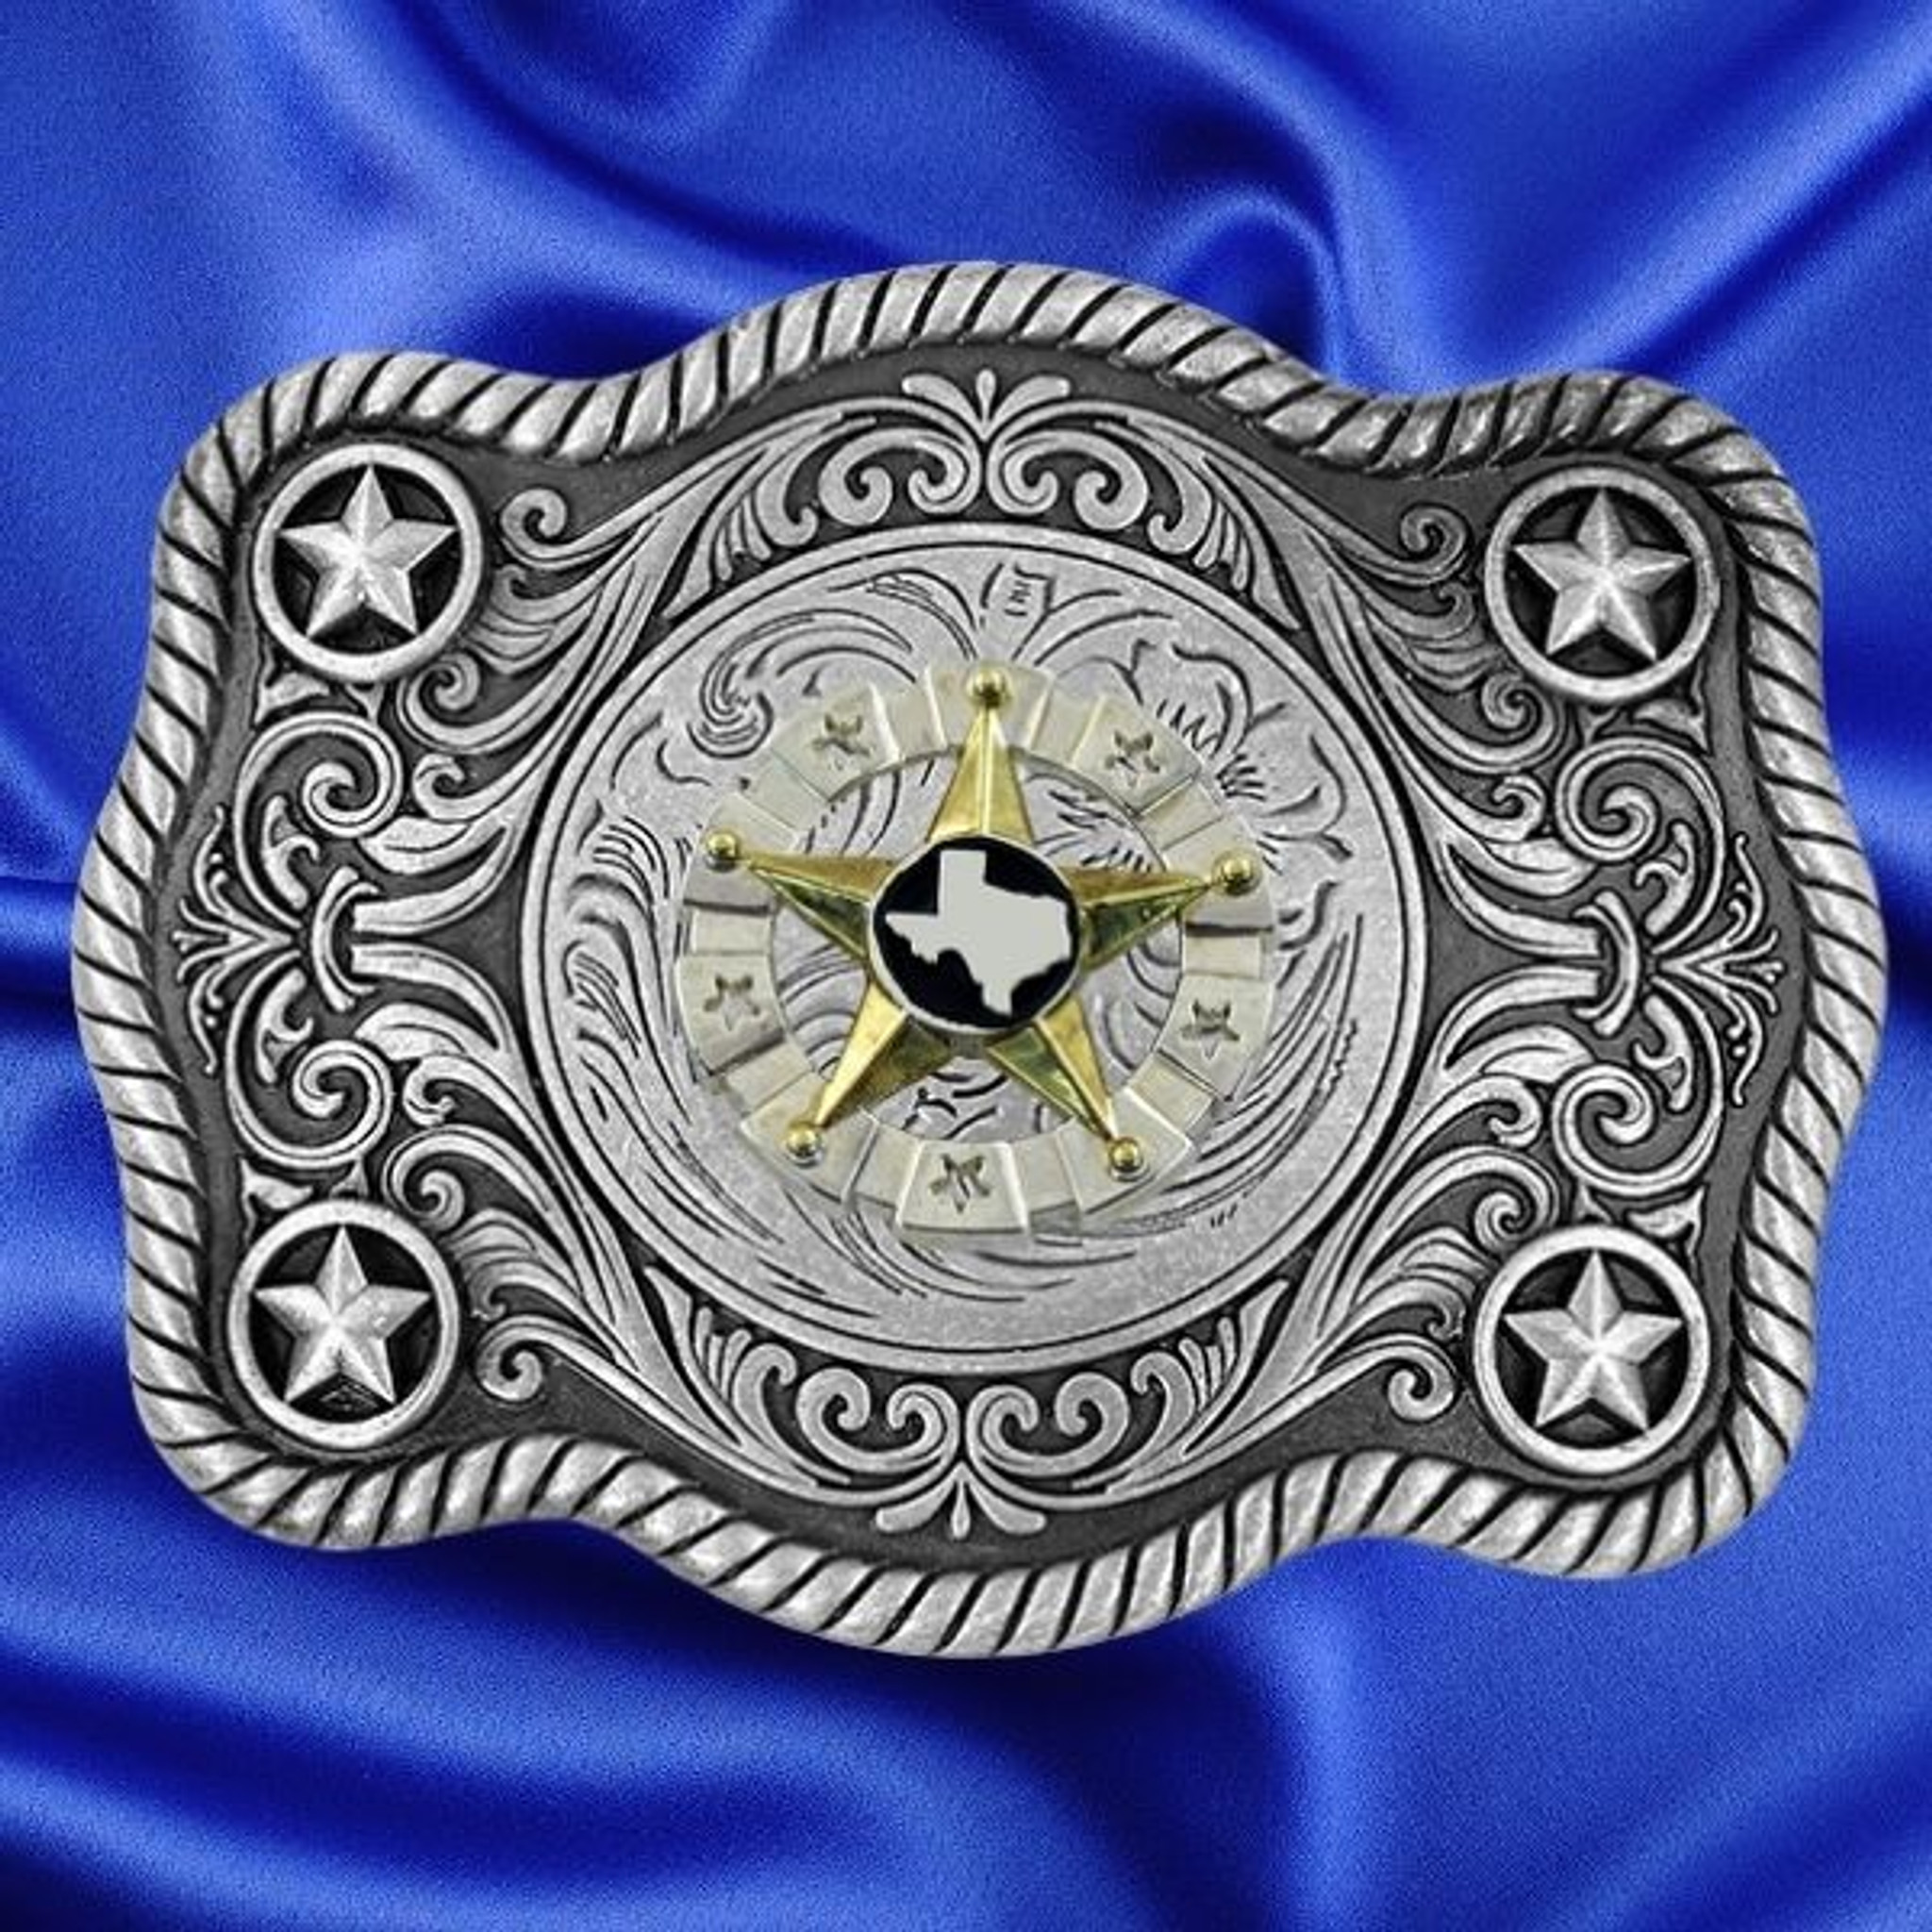 Texas State Seal Gold and Silver-Tone Belt Buckle